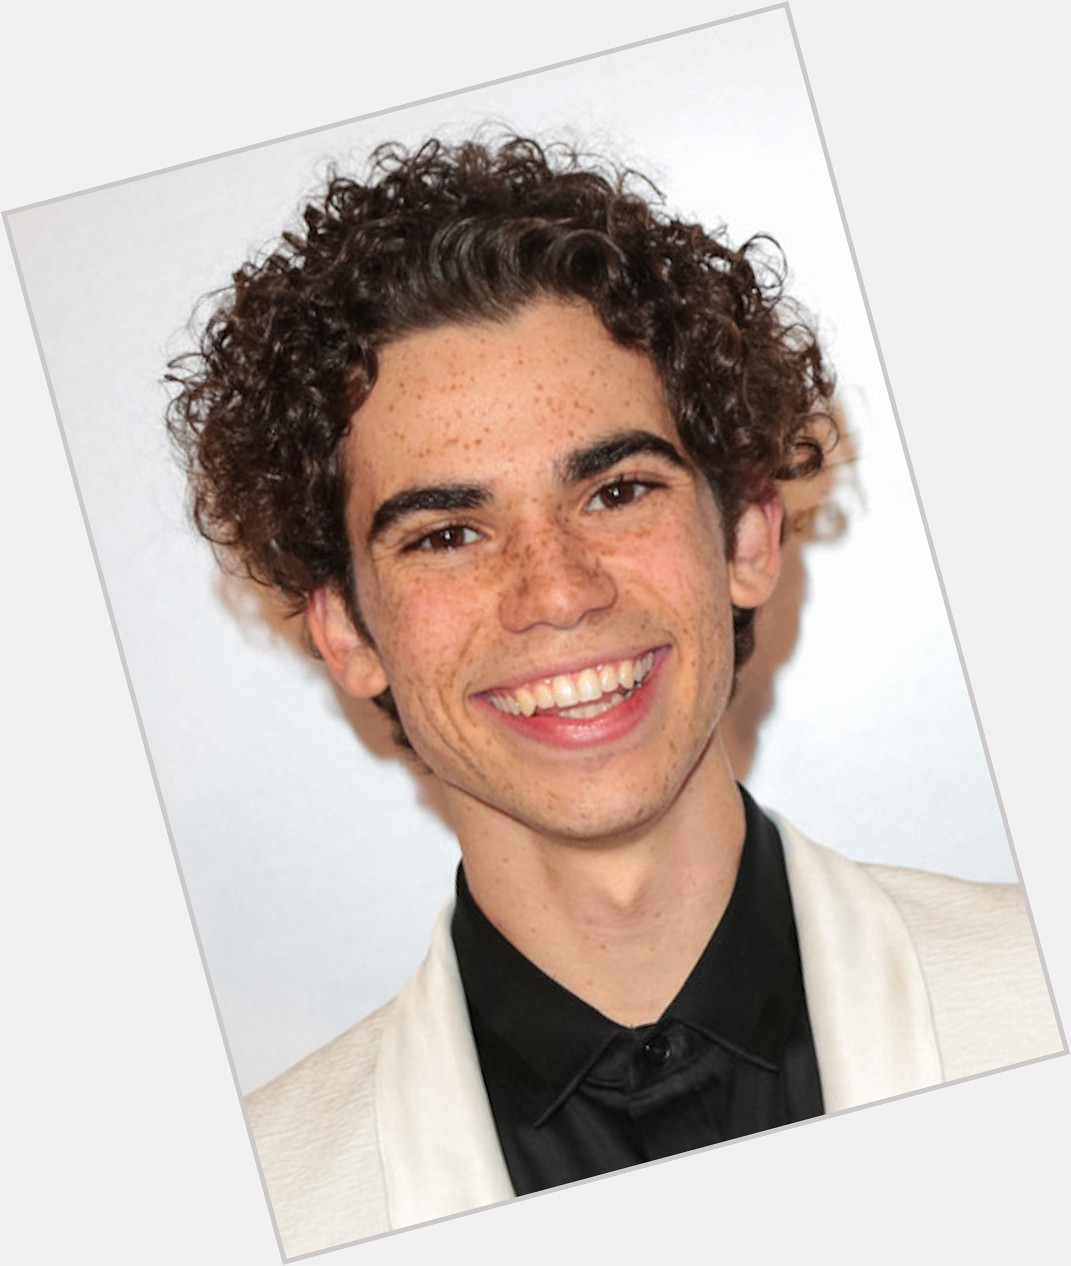 I want to wish Cameron Boyce a happy birthday. Today he would of been 21. 